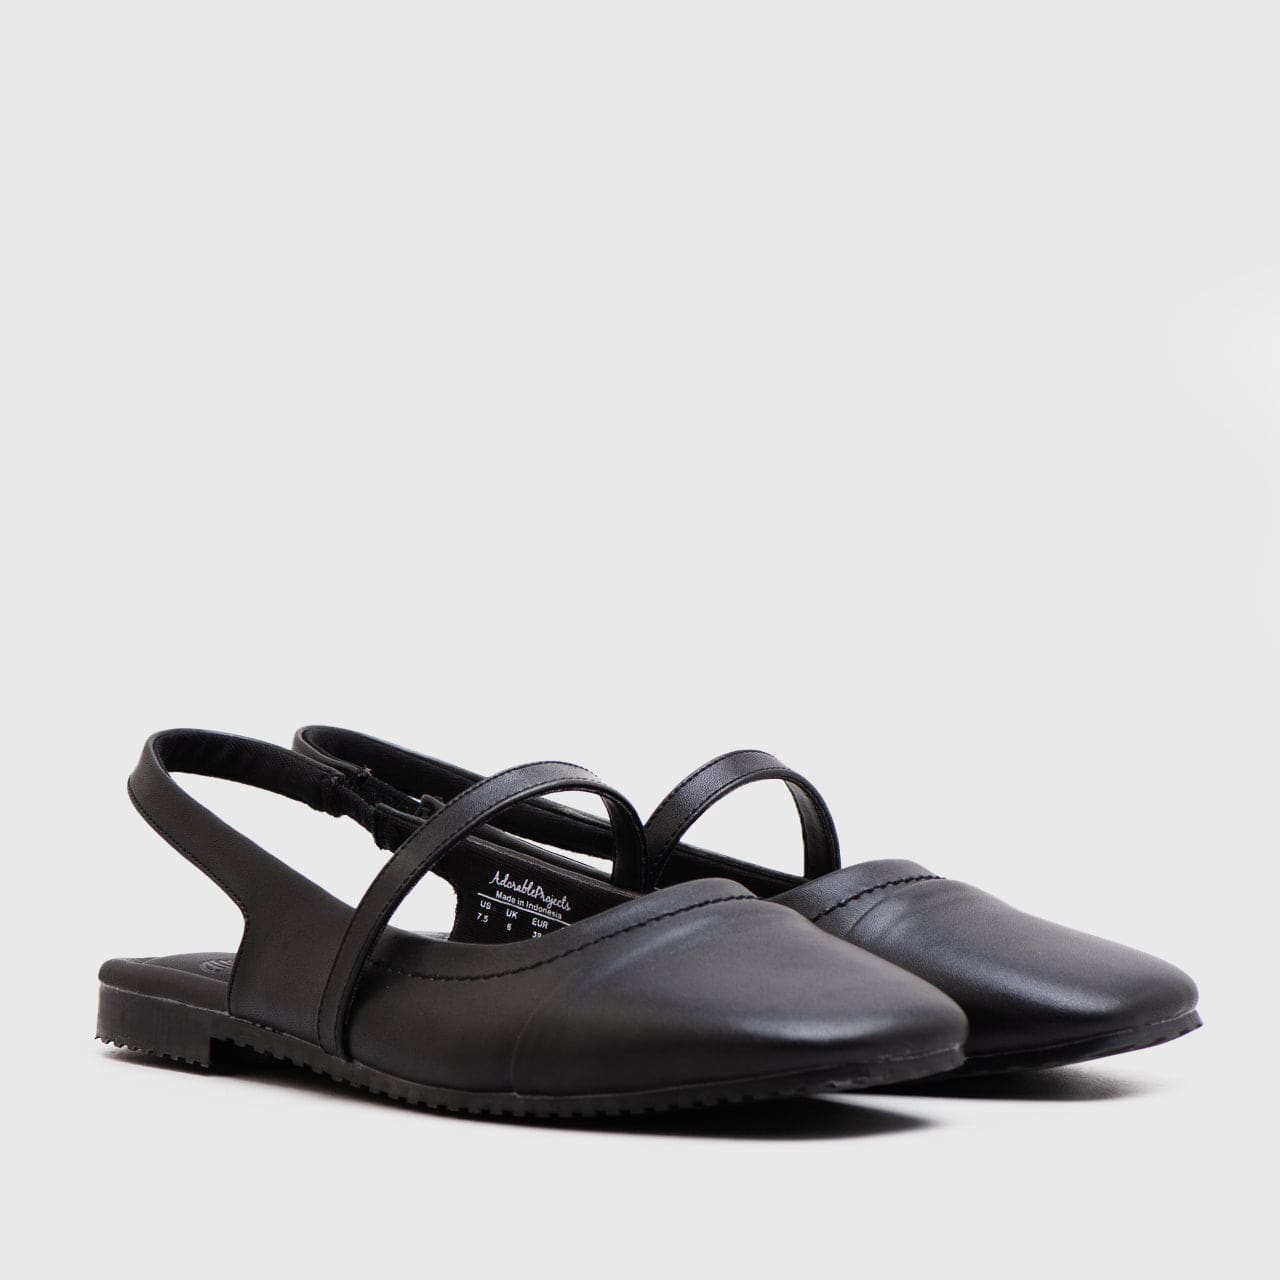 Adorable Projects Official Prilla Flat Shoes Black